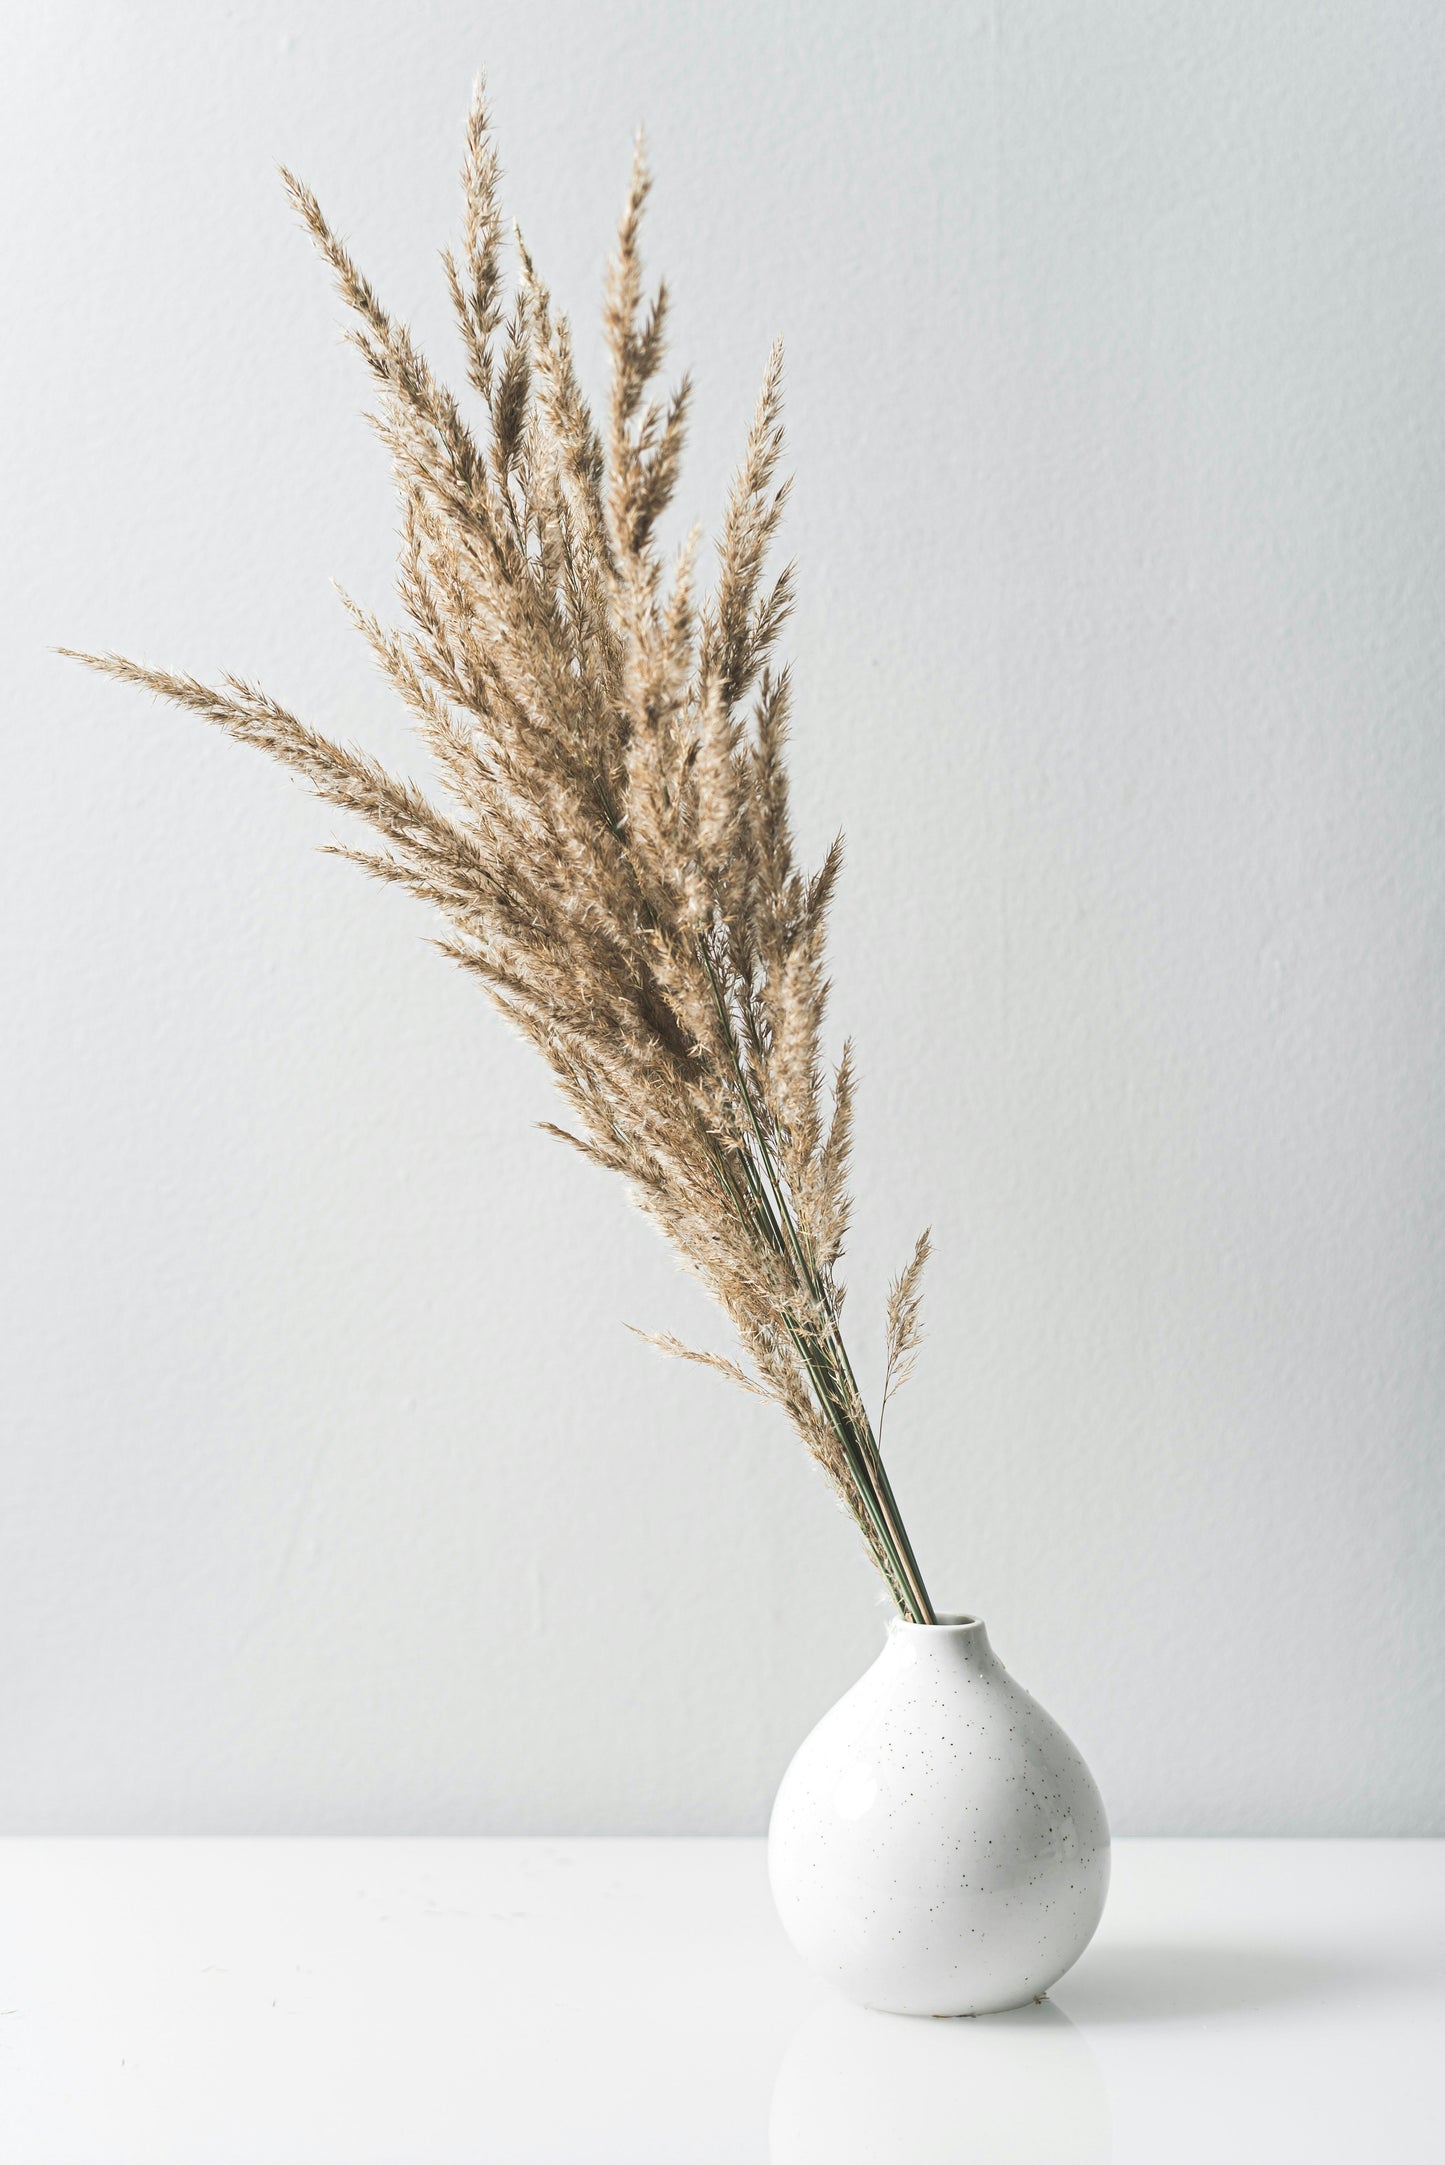 Dried Wheat Stalks for Decorating Table